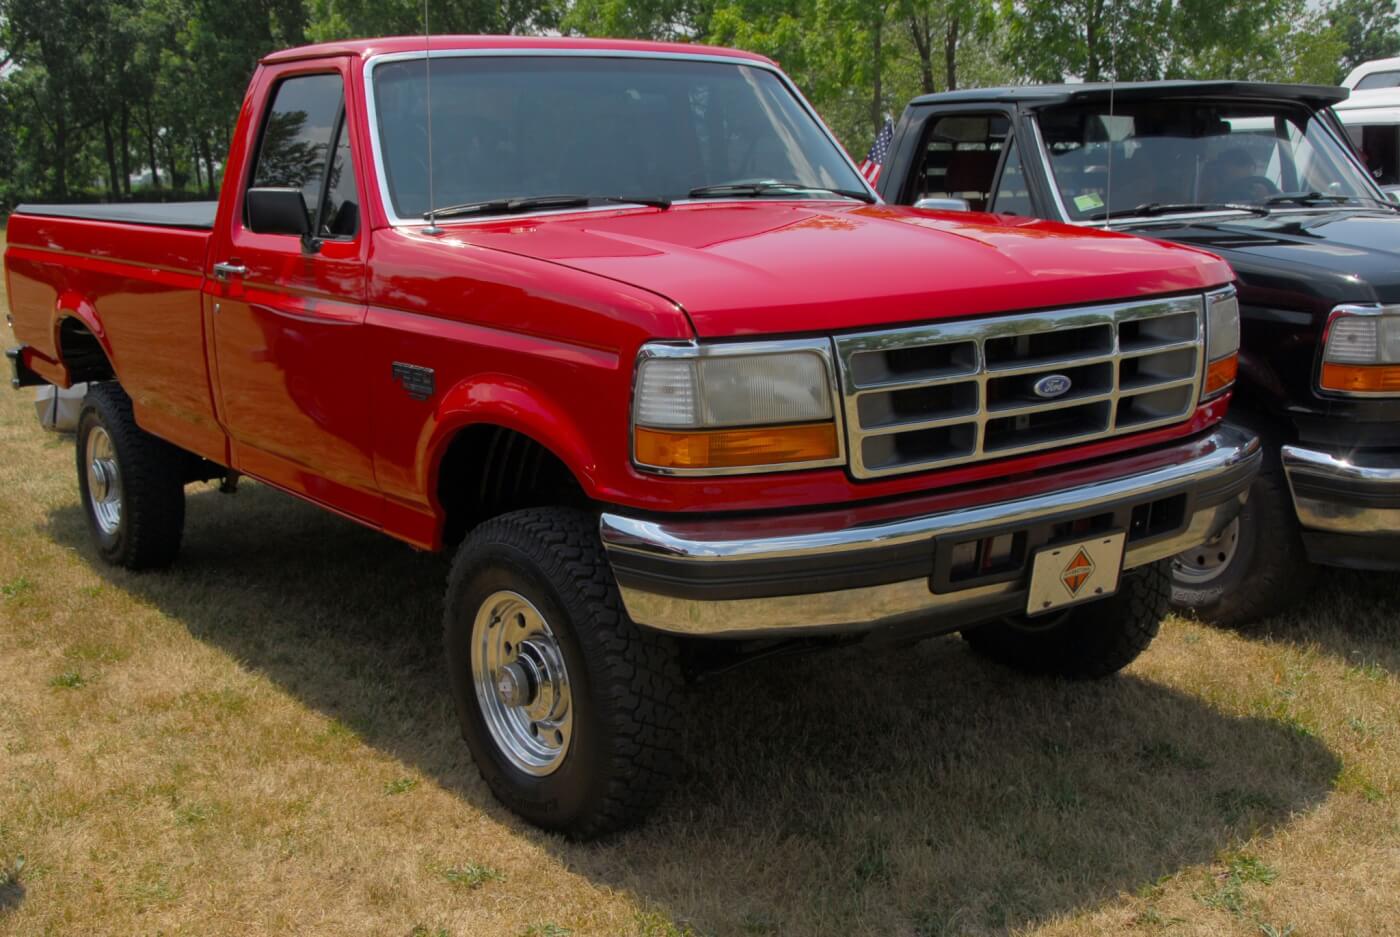 The upgraded 1992 Ford truck line was where the IDI would make its final bow and the Power Stroke would take over. The only thing to mark a naturally aspirated diesel in this era was a badge on the tailgate. In the case of this 1993 turbo diesel truck, there’s an additional “Turbo Diesel” badge on the fender. This is Jon Miller’s stunningly restored 1994 F-350.